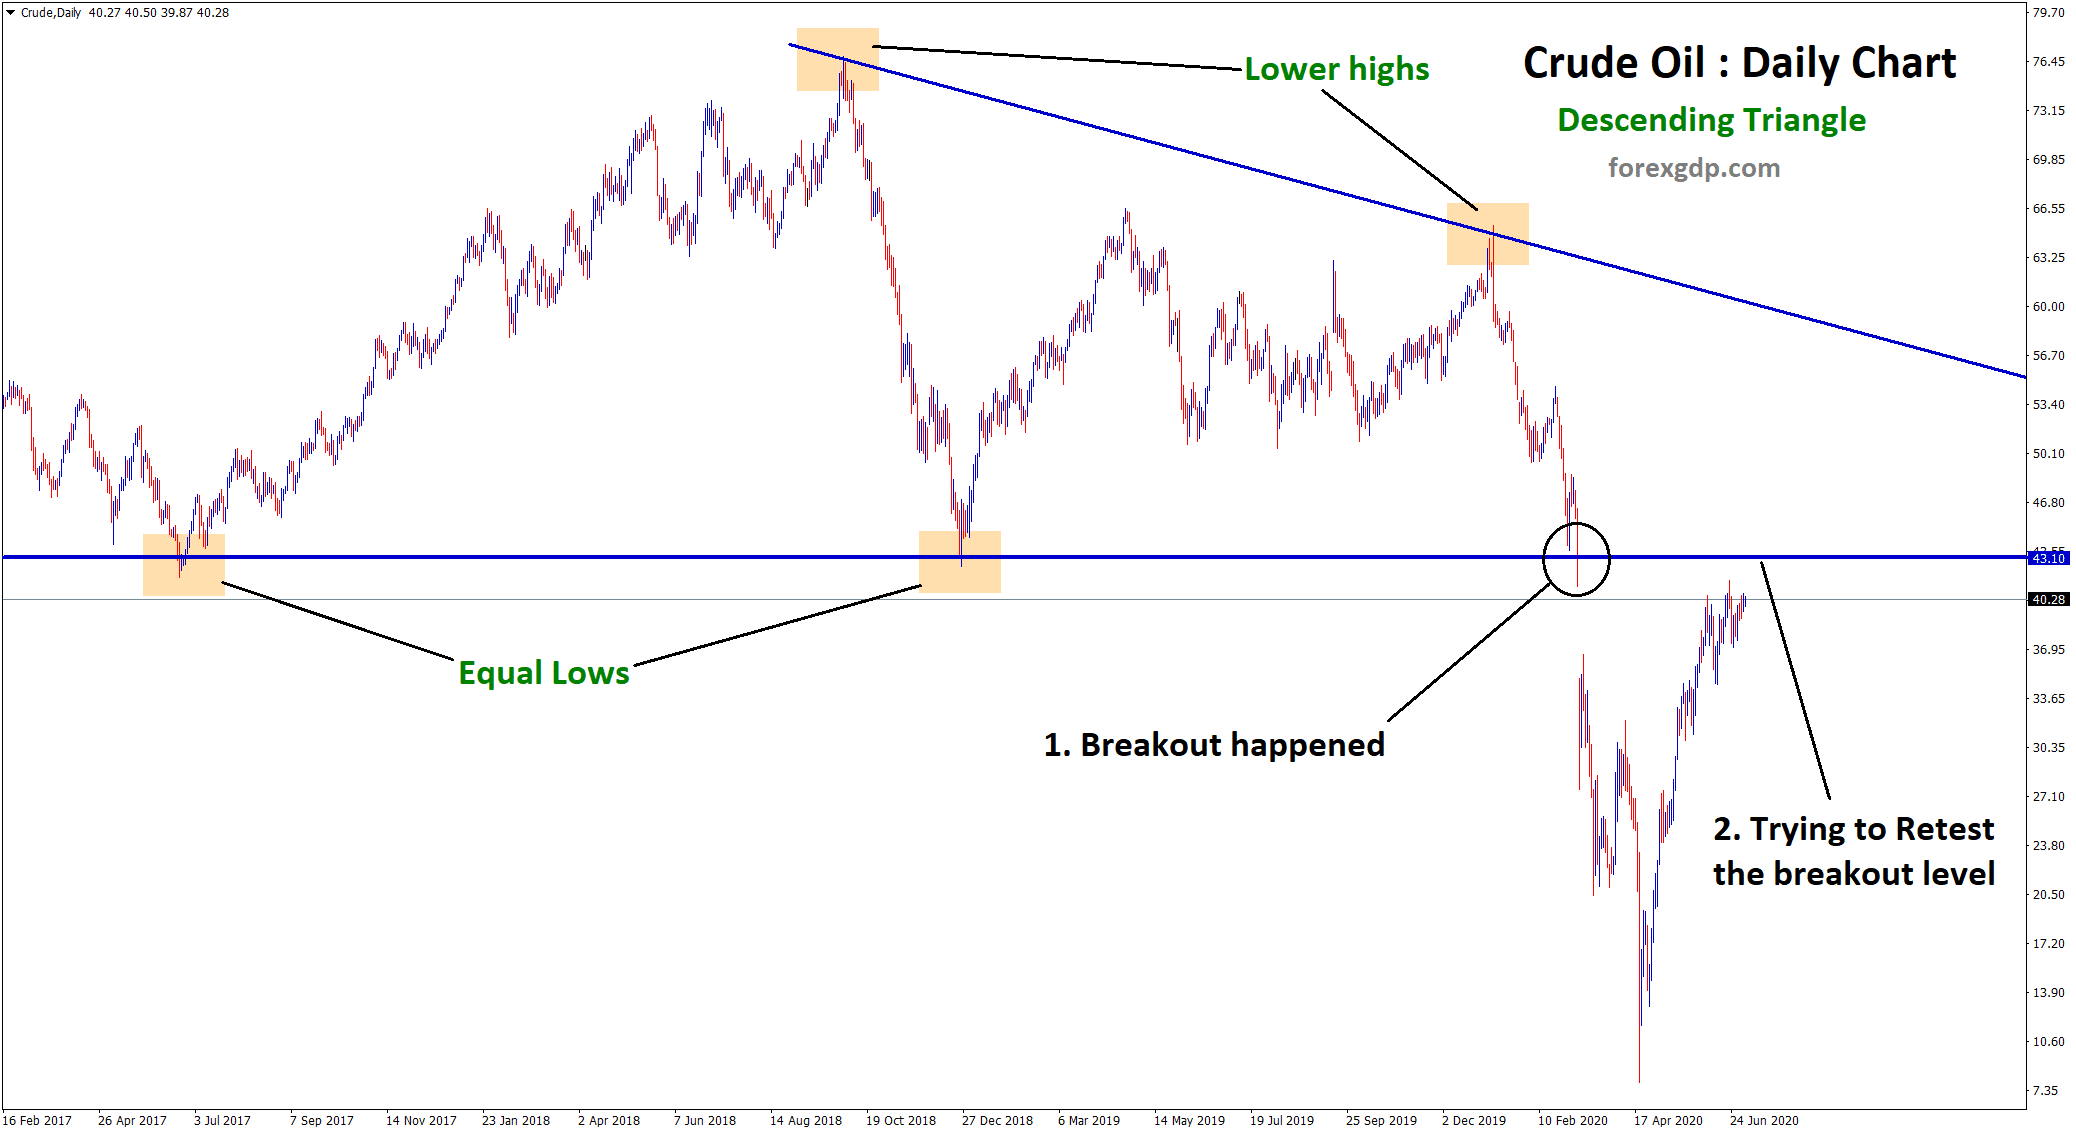 crude oil going to retest the breakout level of descending triangle